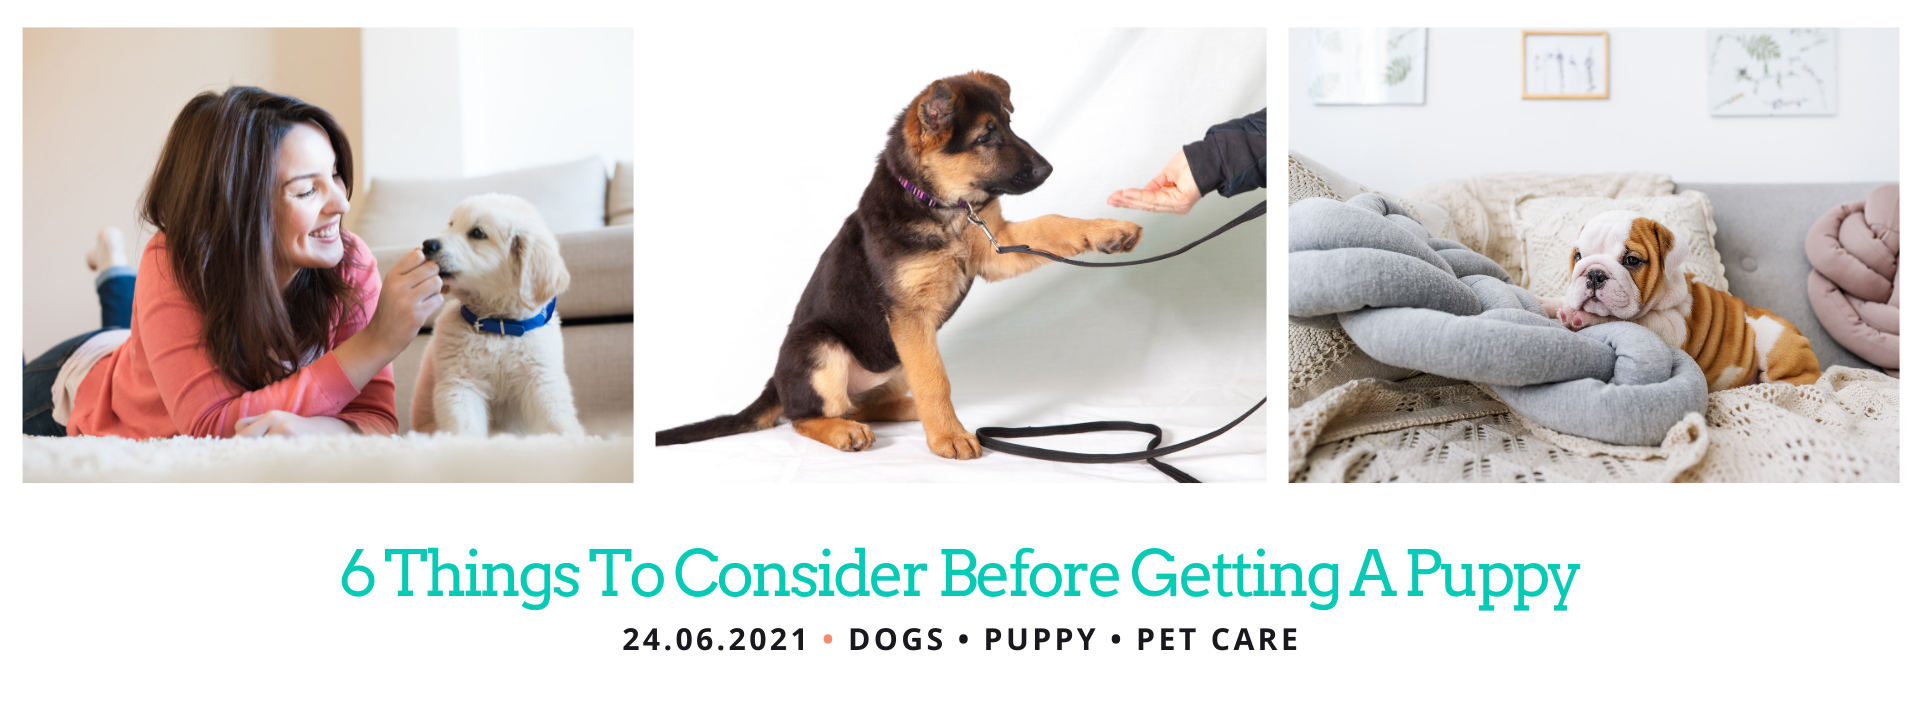 What to Consider When Getting a Puppy